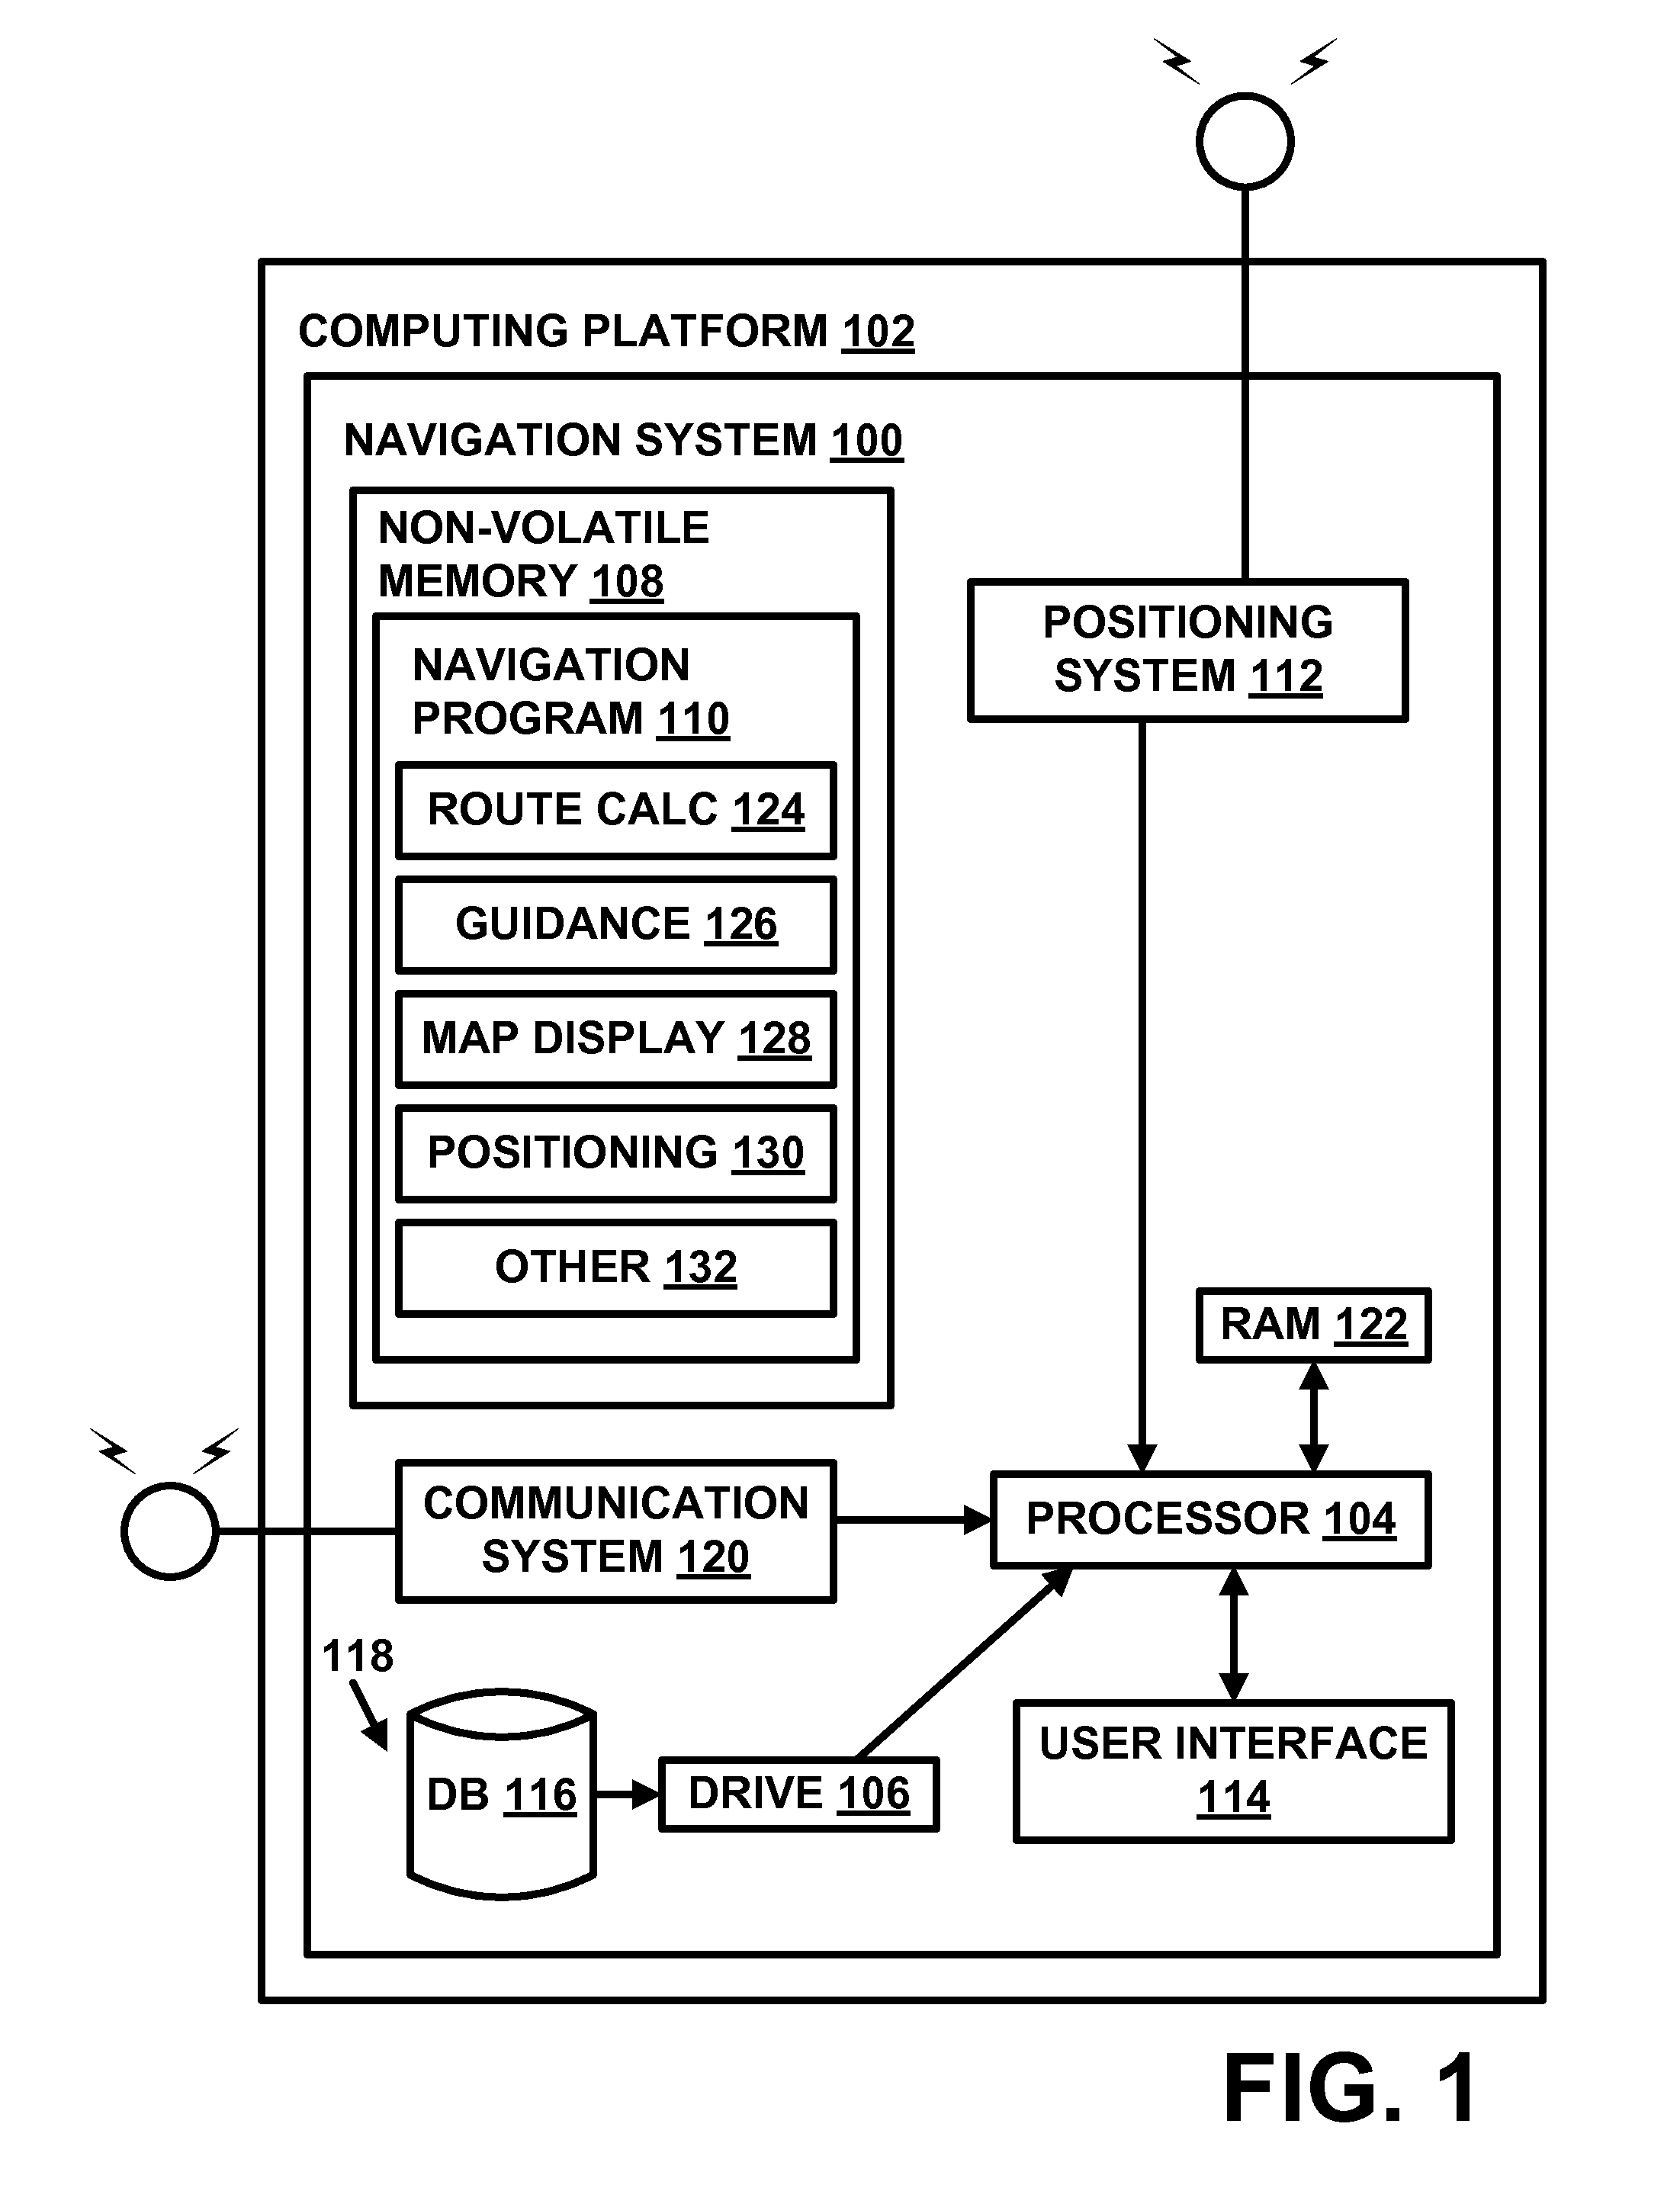 Method of Operating a Navigation System to Provide Route Guidance